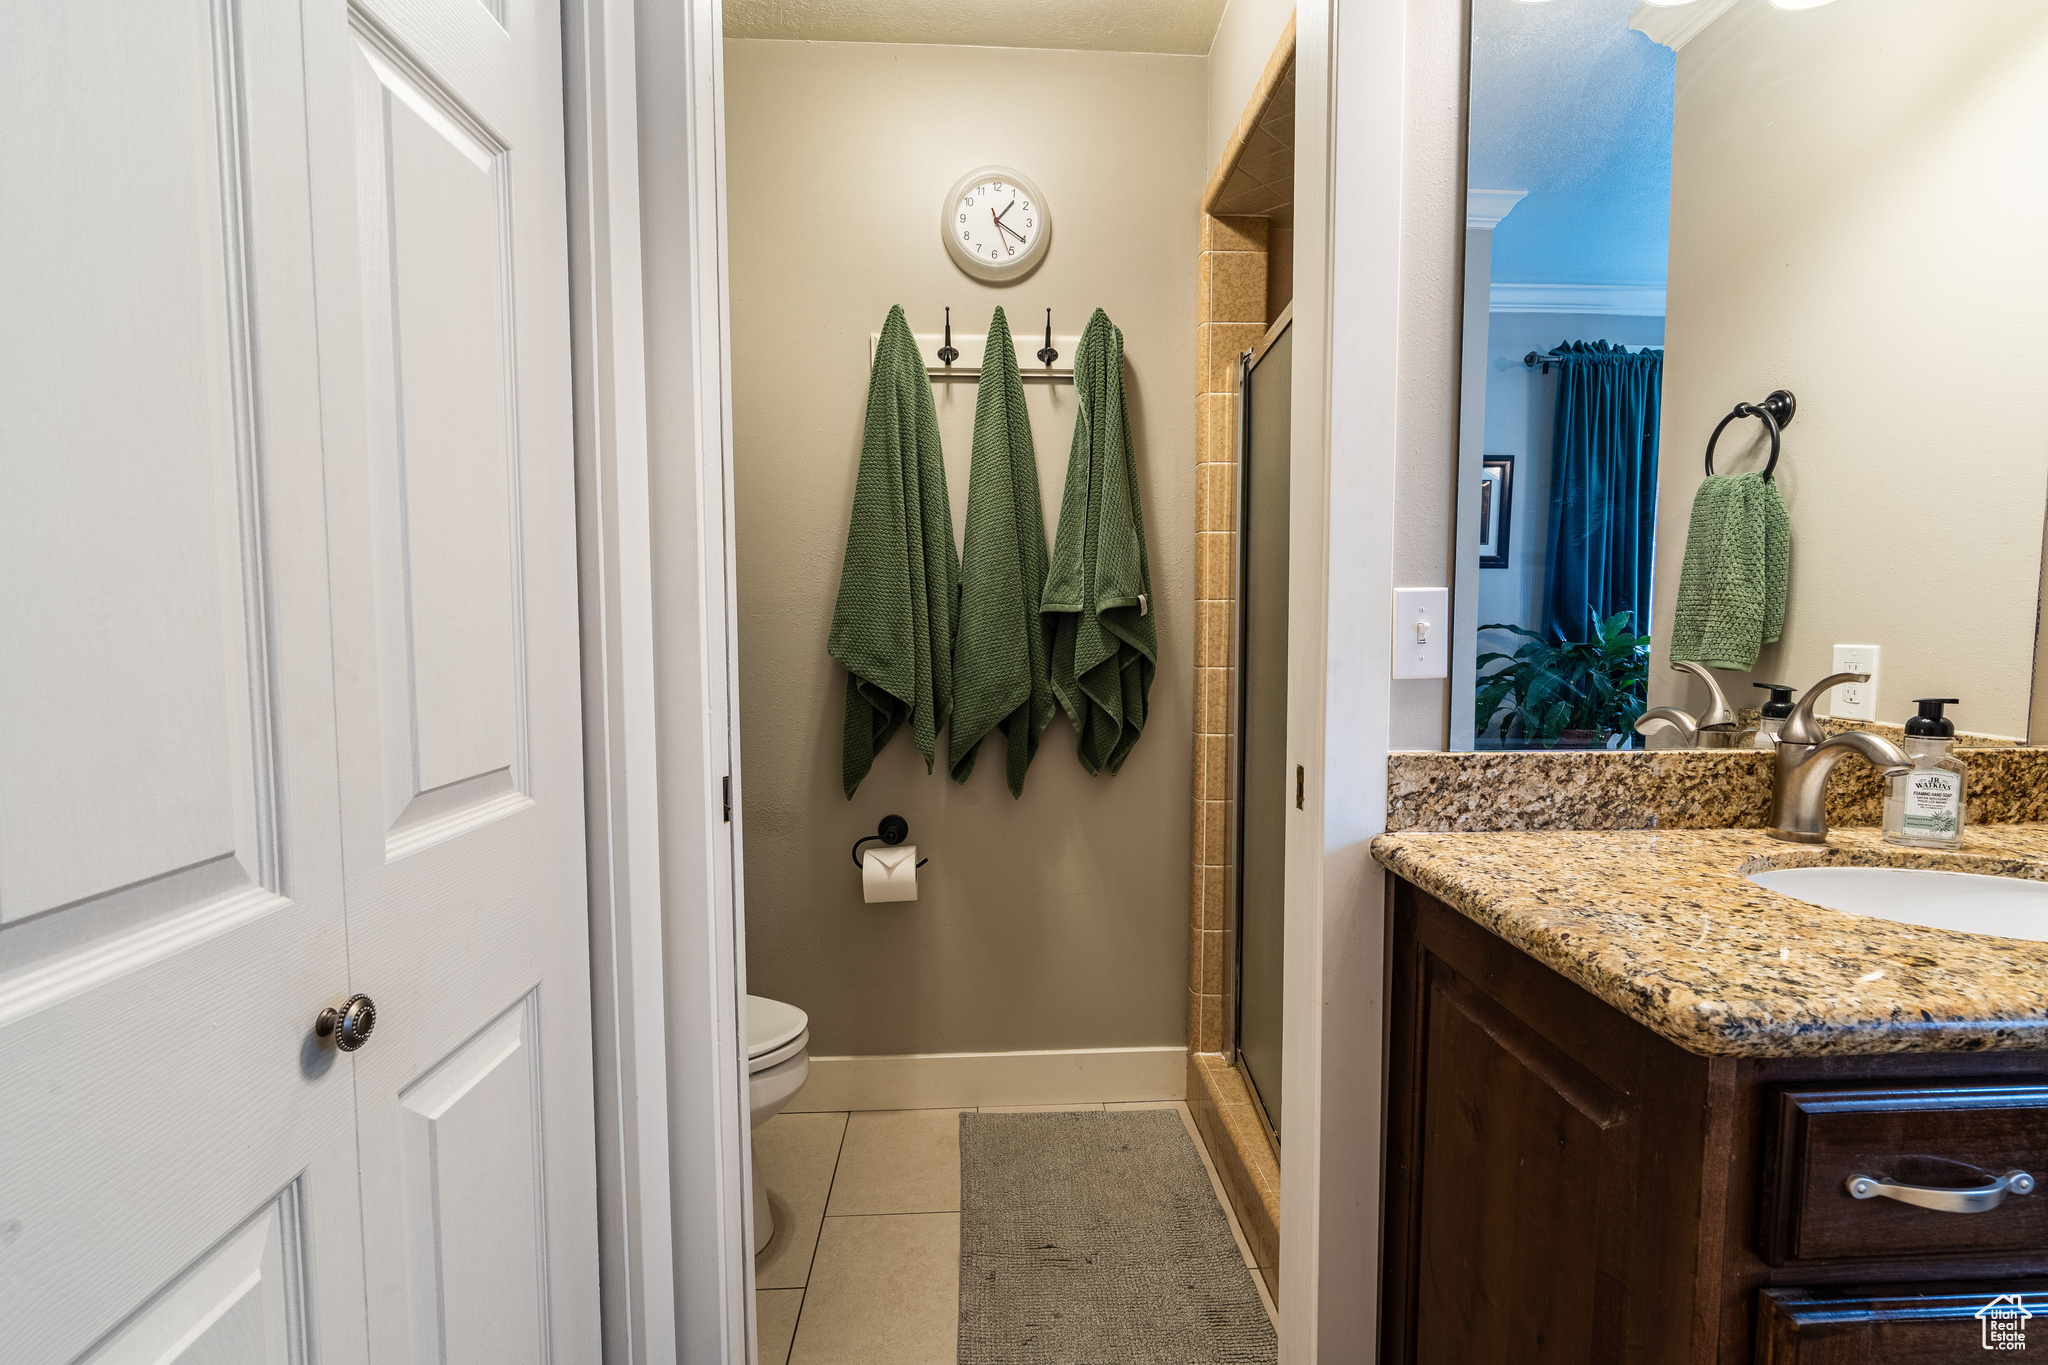 Master suite with vanity, a shower with door, toilet, tile floors, and crown molding